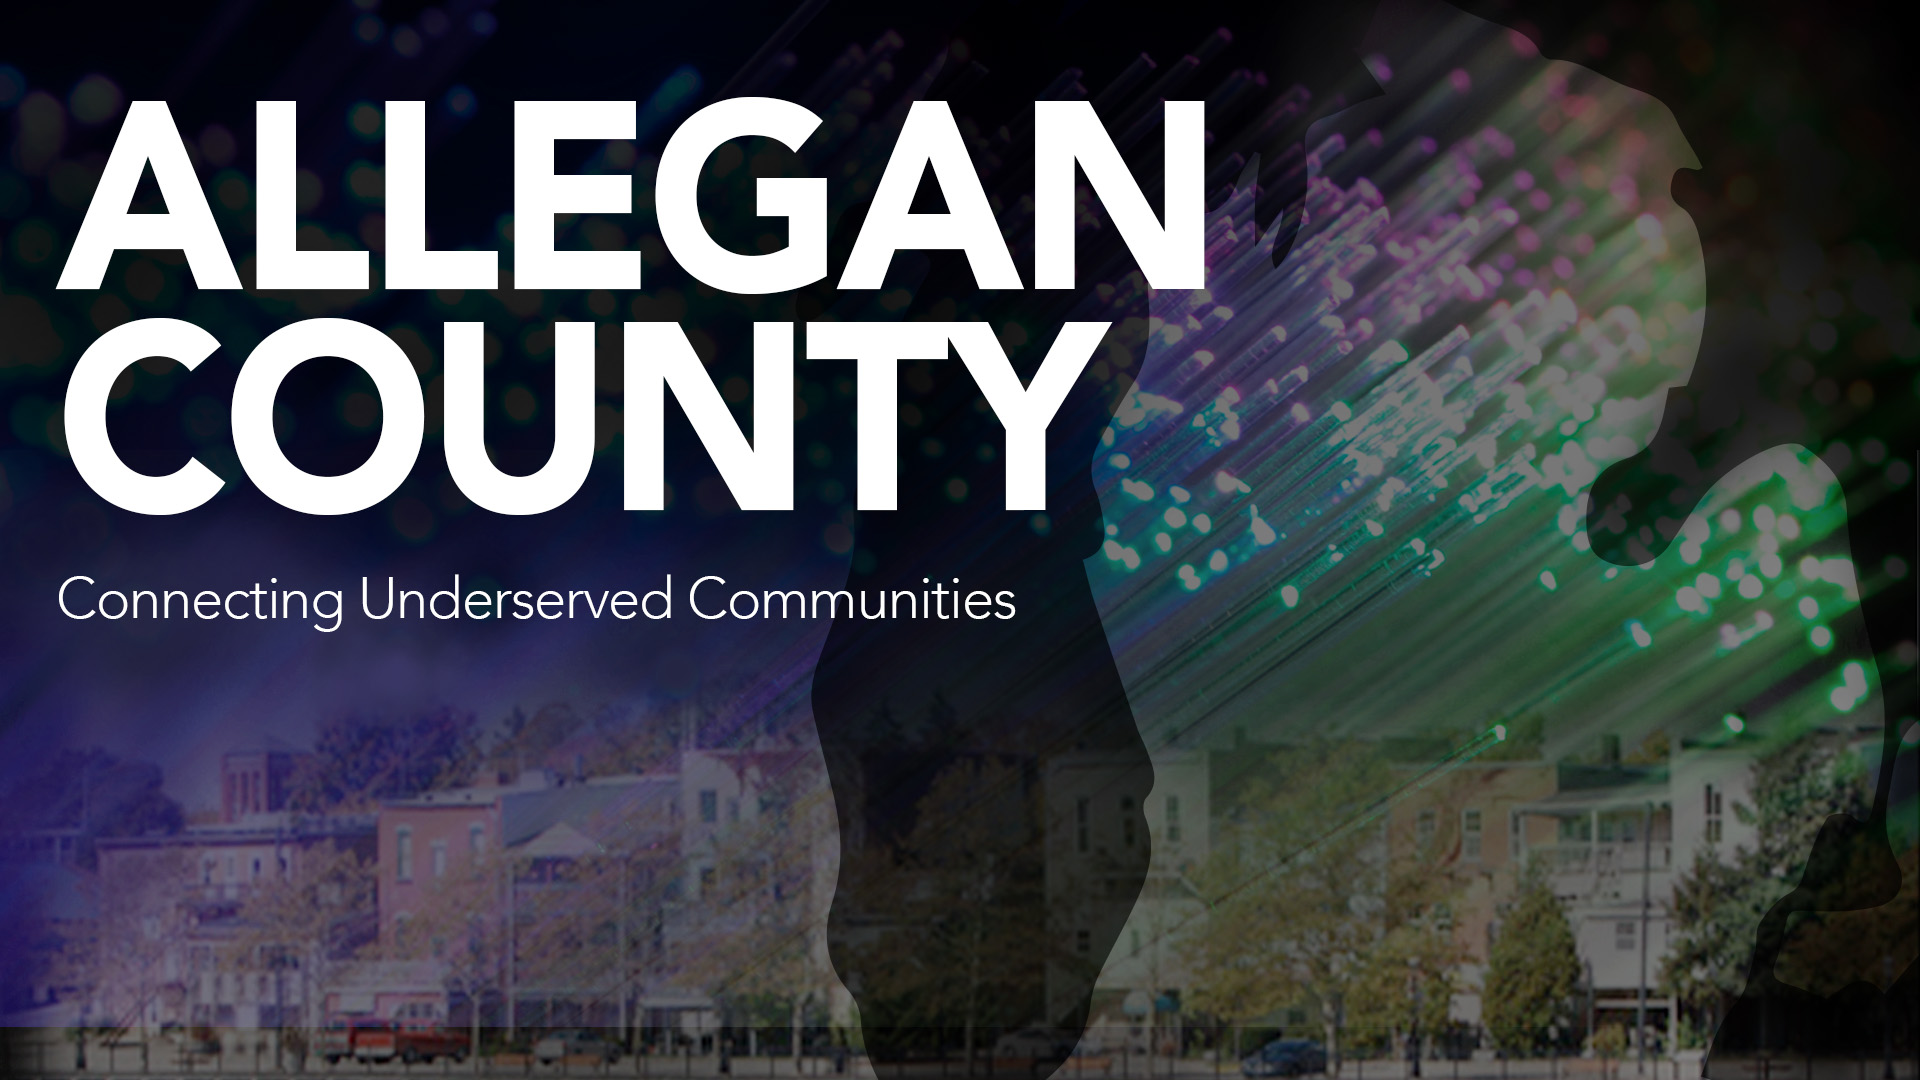 <strong>Allegan County Selects 123NET to Provide Fiber Internet to 12,000 Underserved Homes</strong>